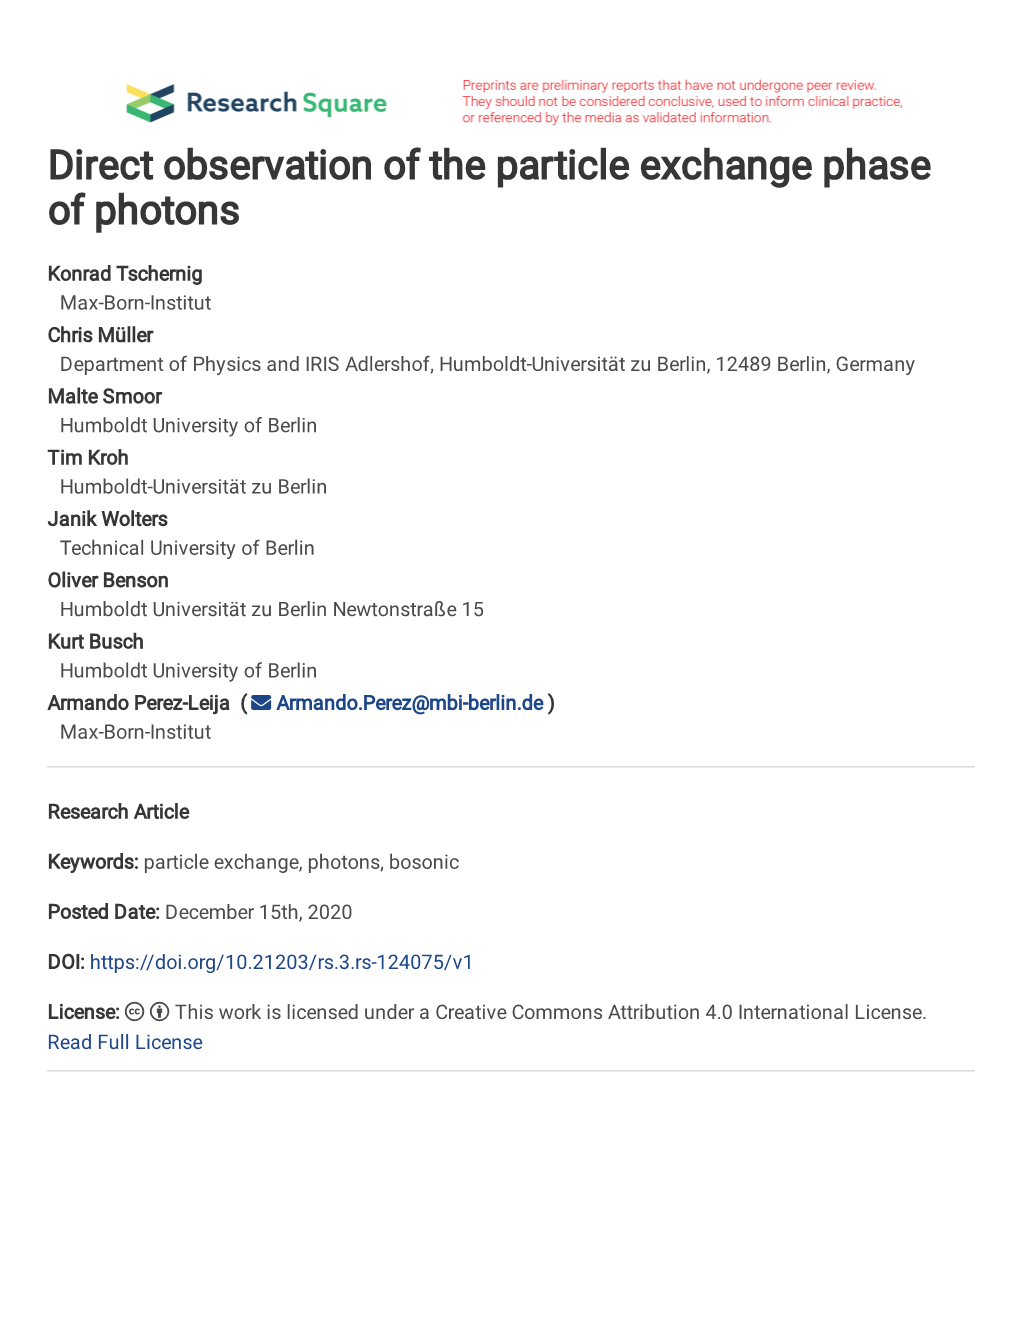 Direct Observation of the Particle Exchange Phase of Photons